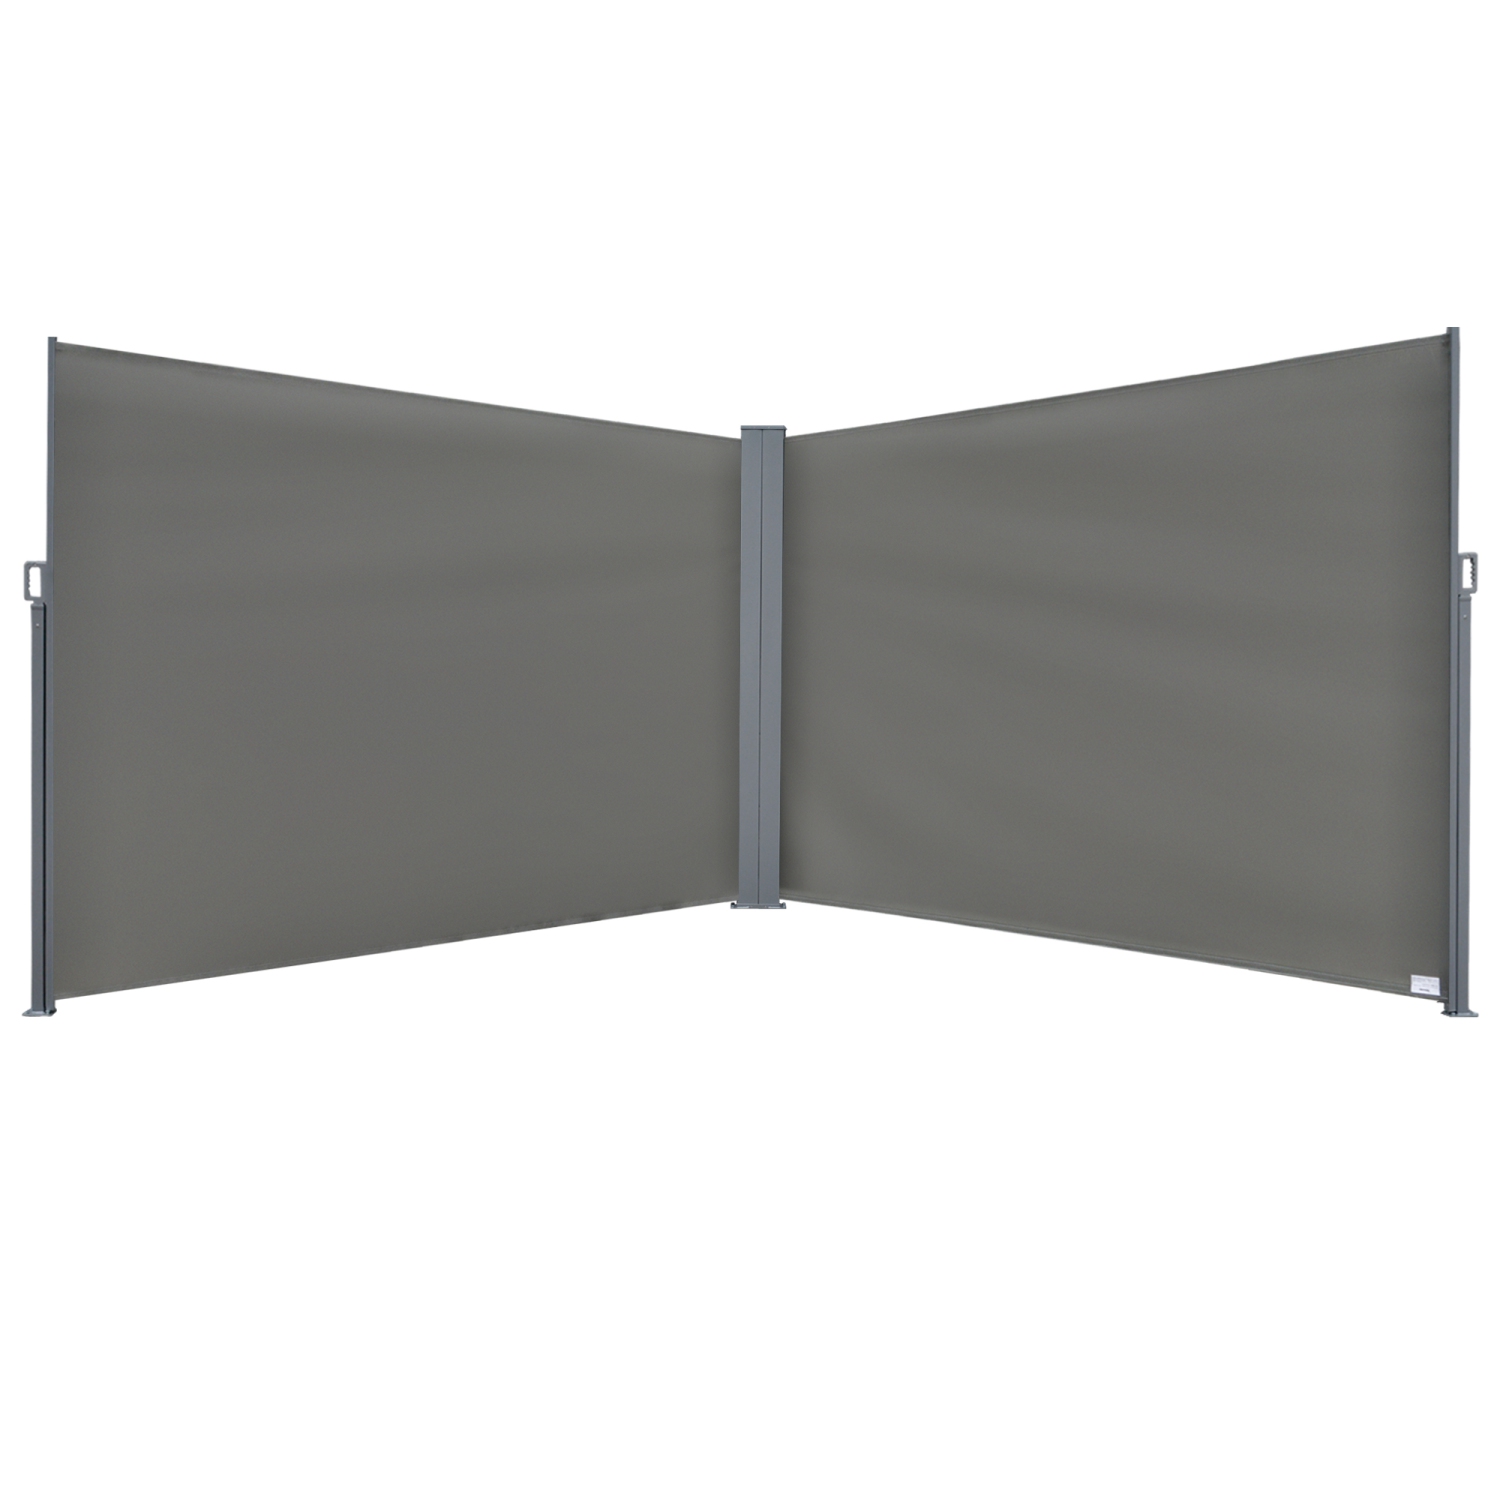 Outsunny Patio Retractable Double Side Awning, Folding Privacy Screen Fence, Privacy Wall Corner Divider, Garden Outdoor Sun Shade Wind Screen, Indoor Room Divider, Grey